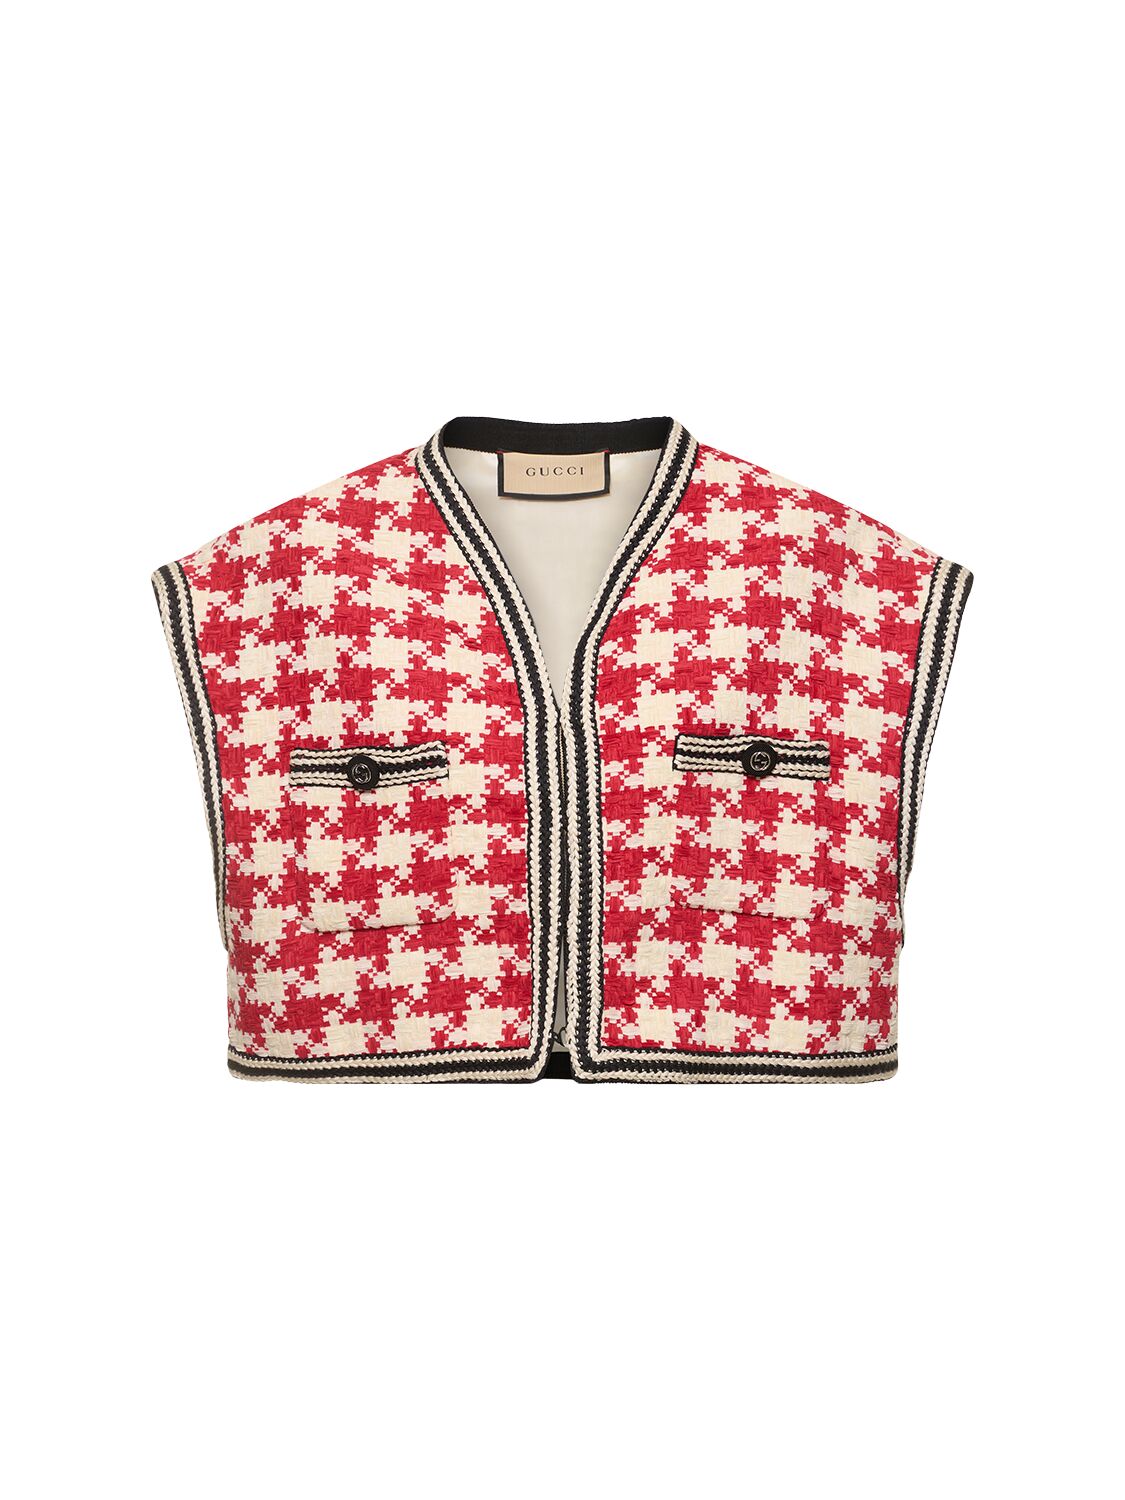 Gucci Tweed Vest In Red,white,multi